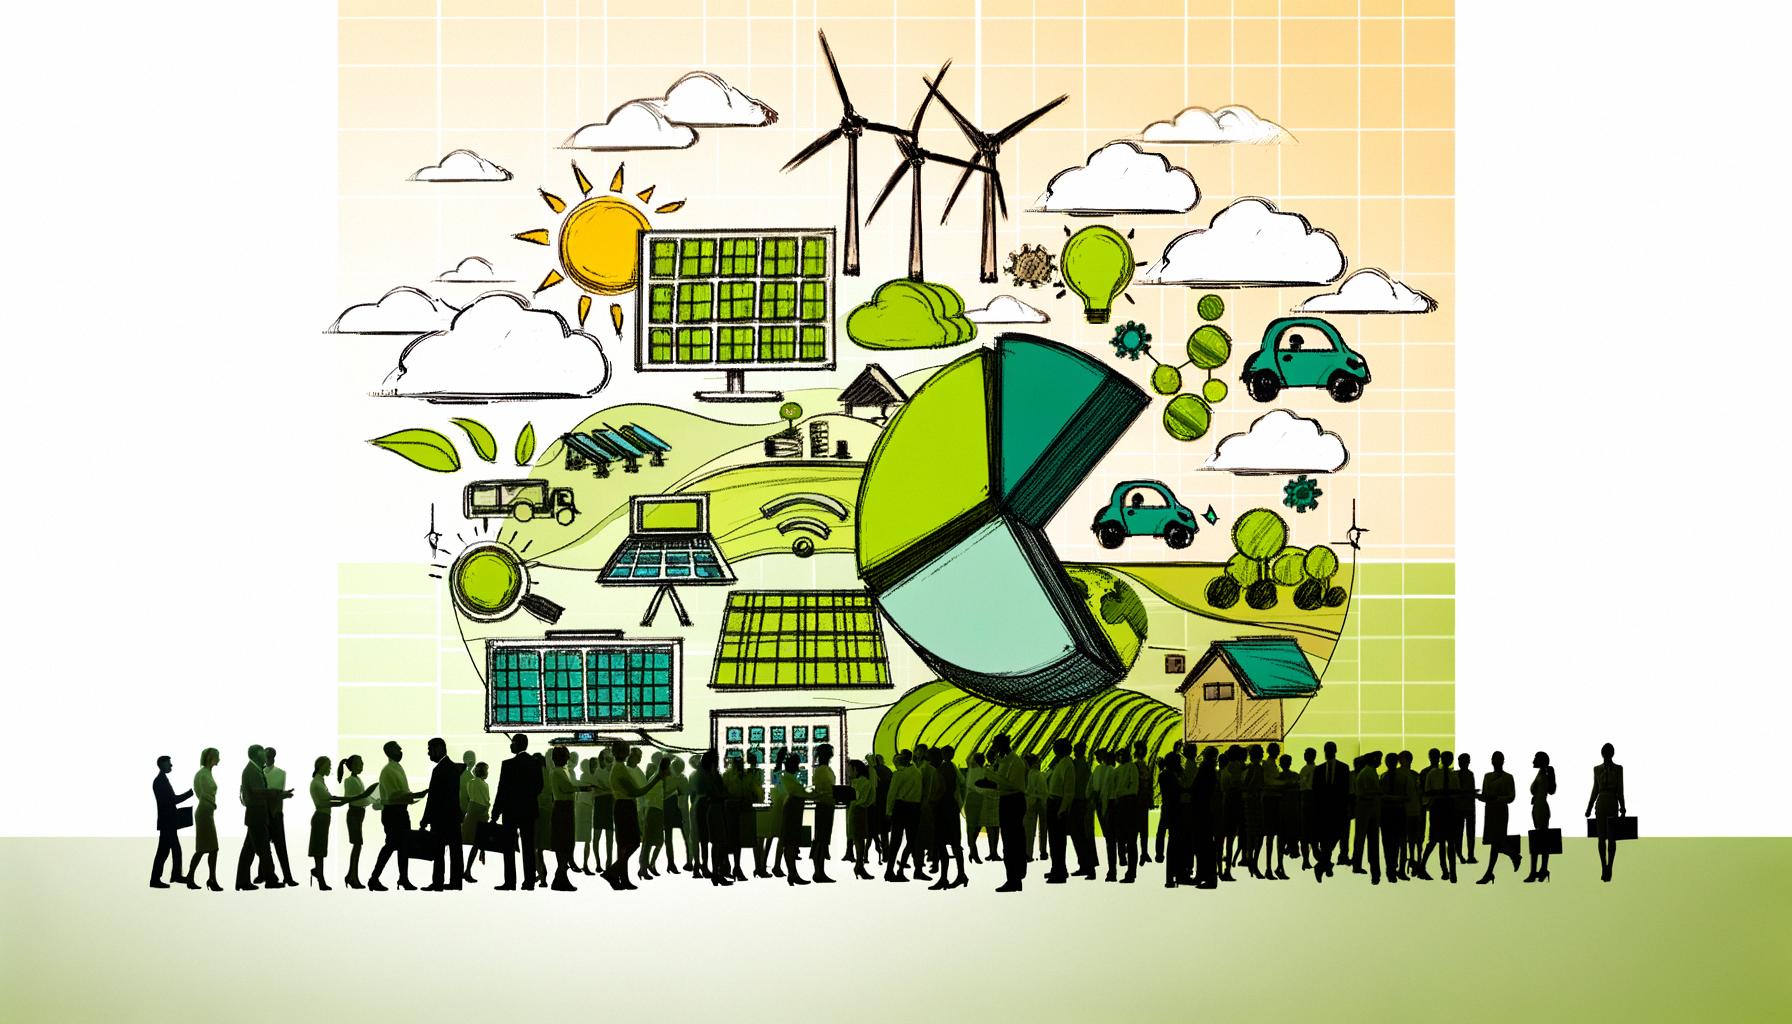 Green tech developing globally and impacting multiple sectors